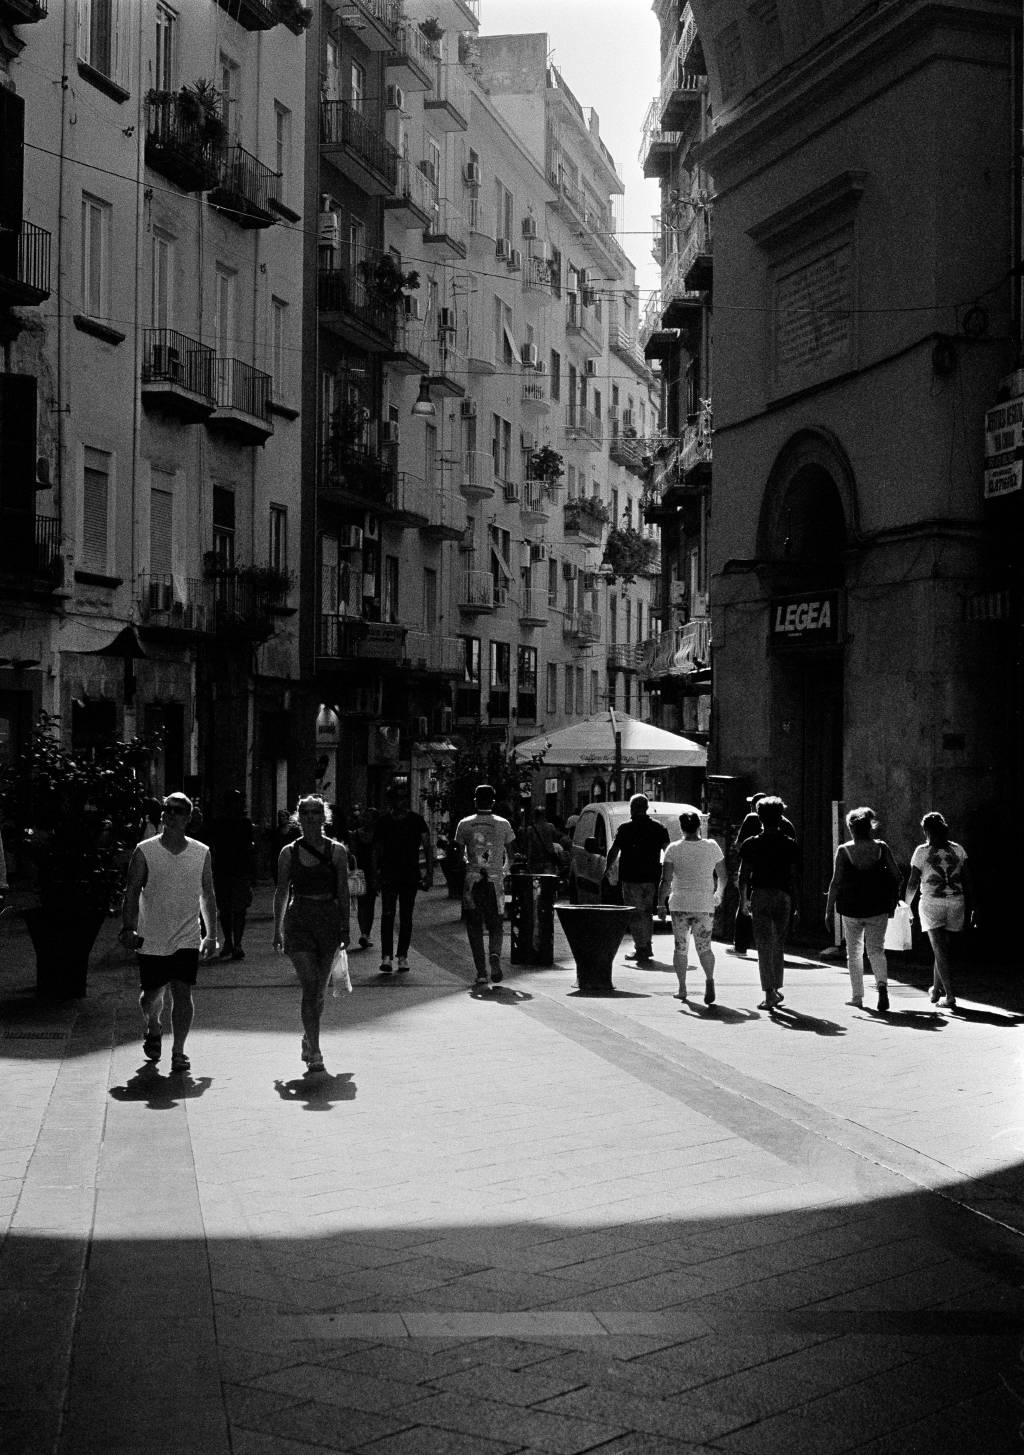 A street in Naples